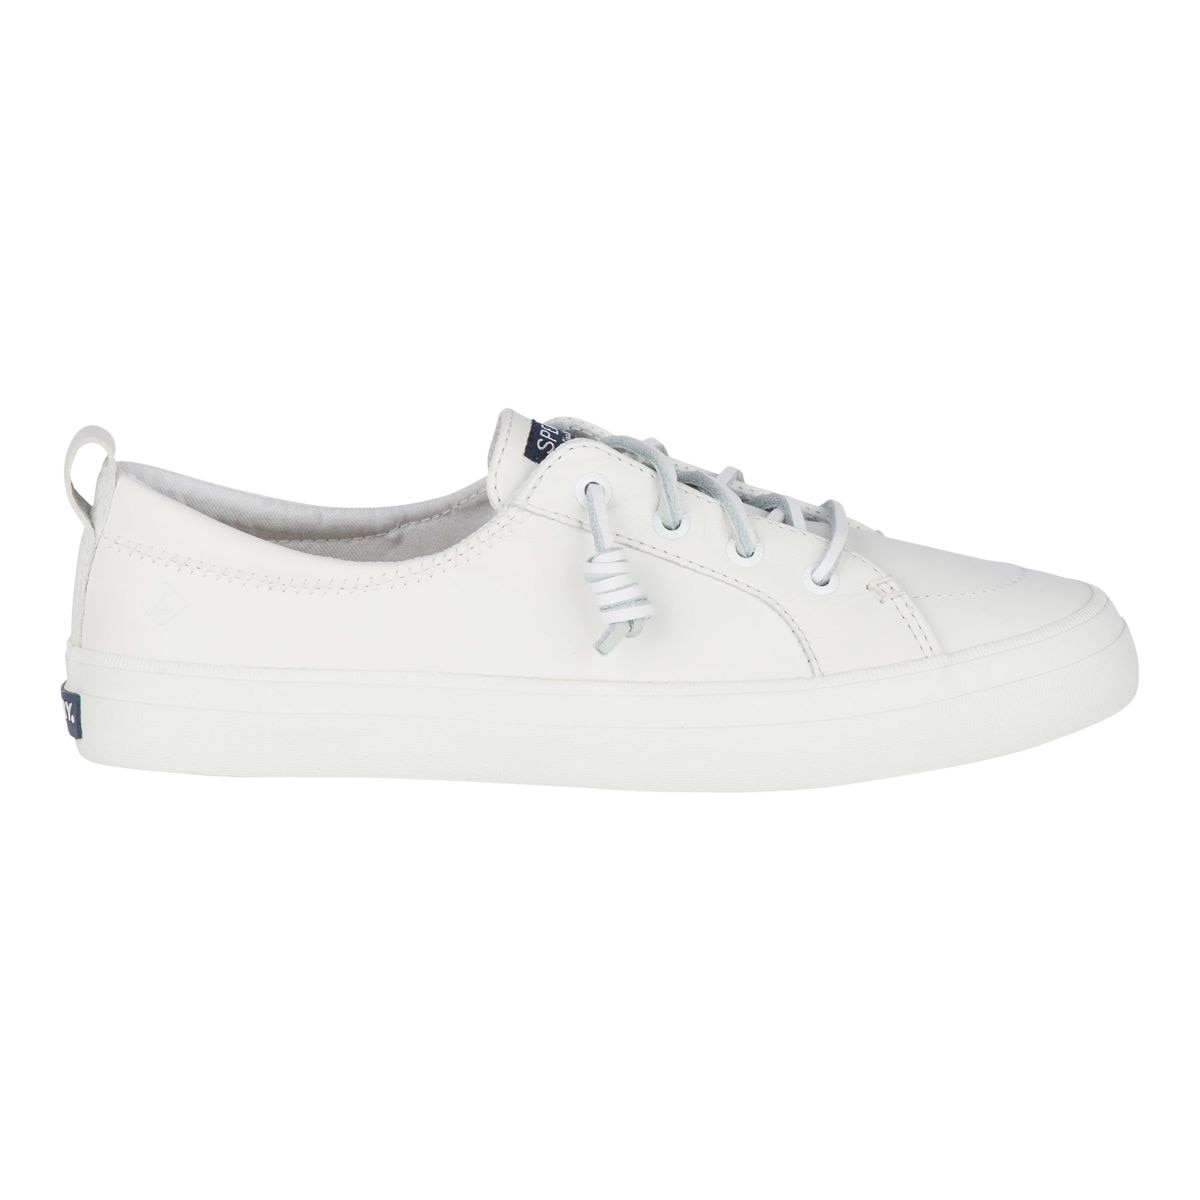 Image of Sperry Women's Crest Vibe Leather Sneakers - White